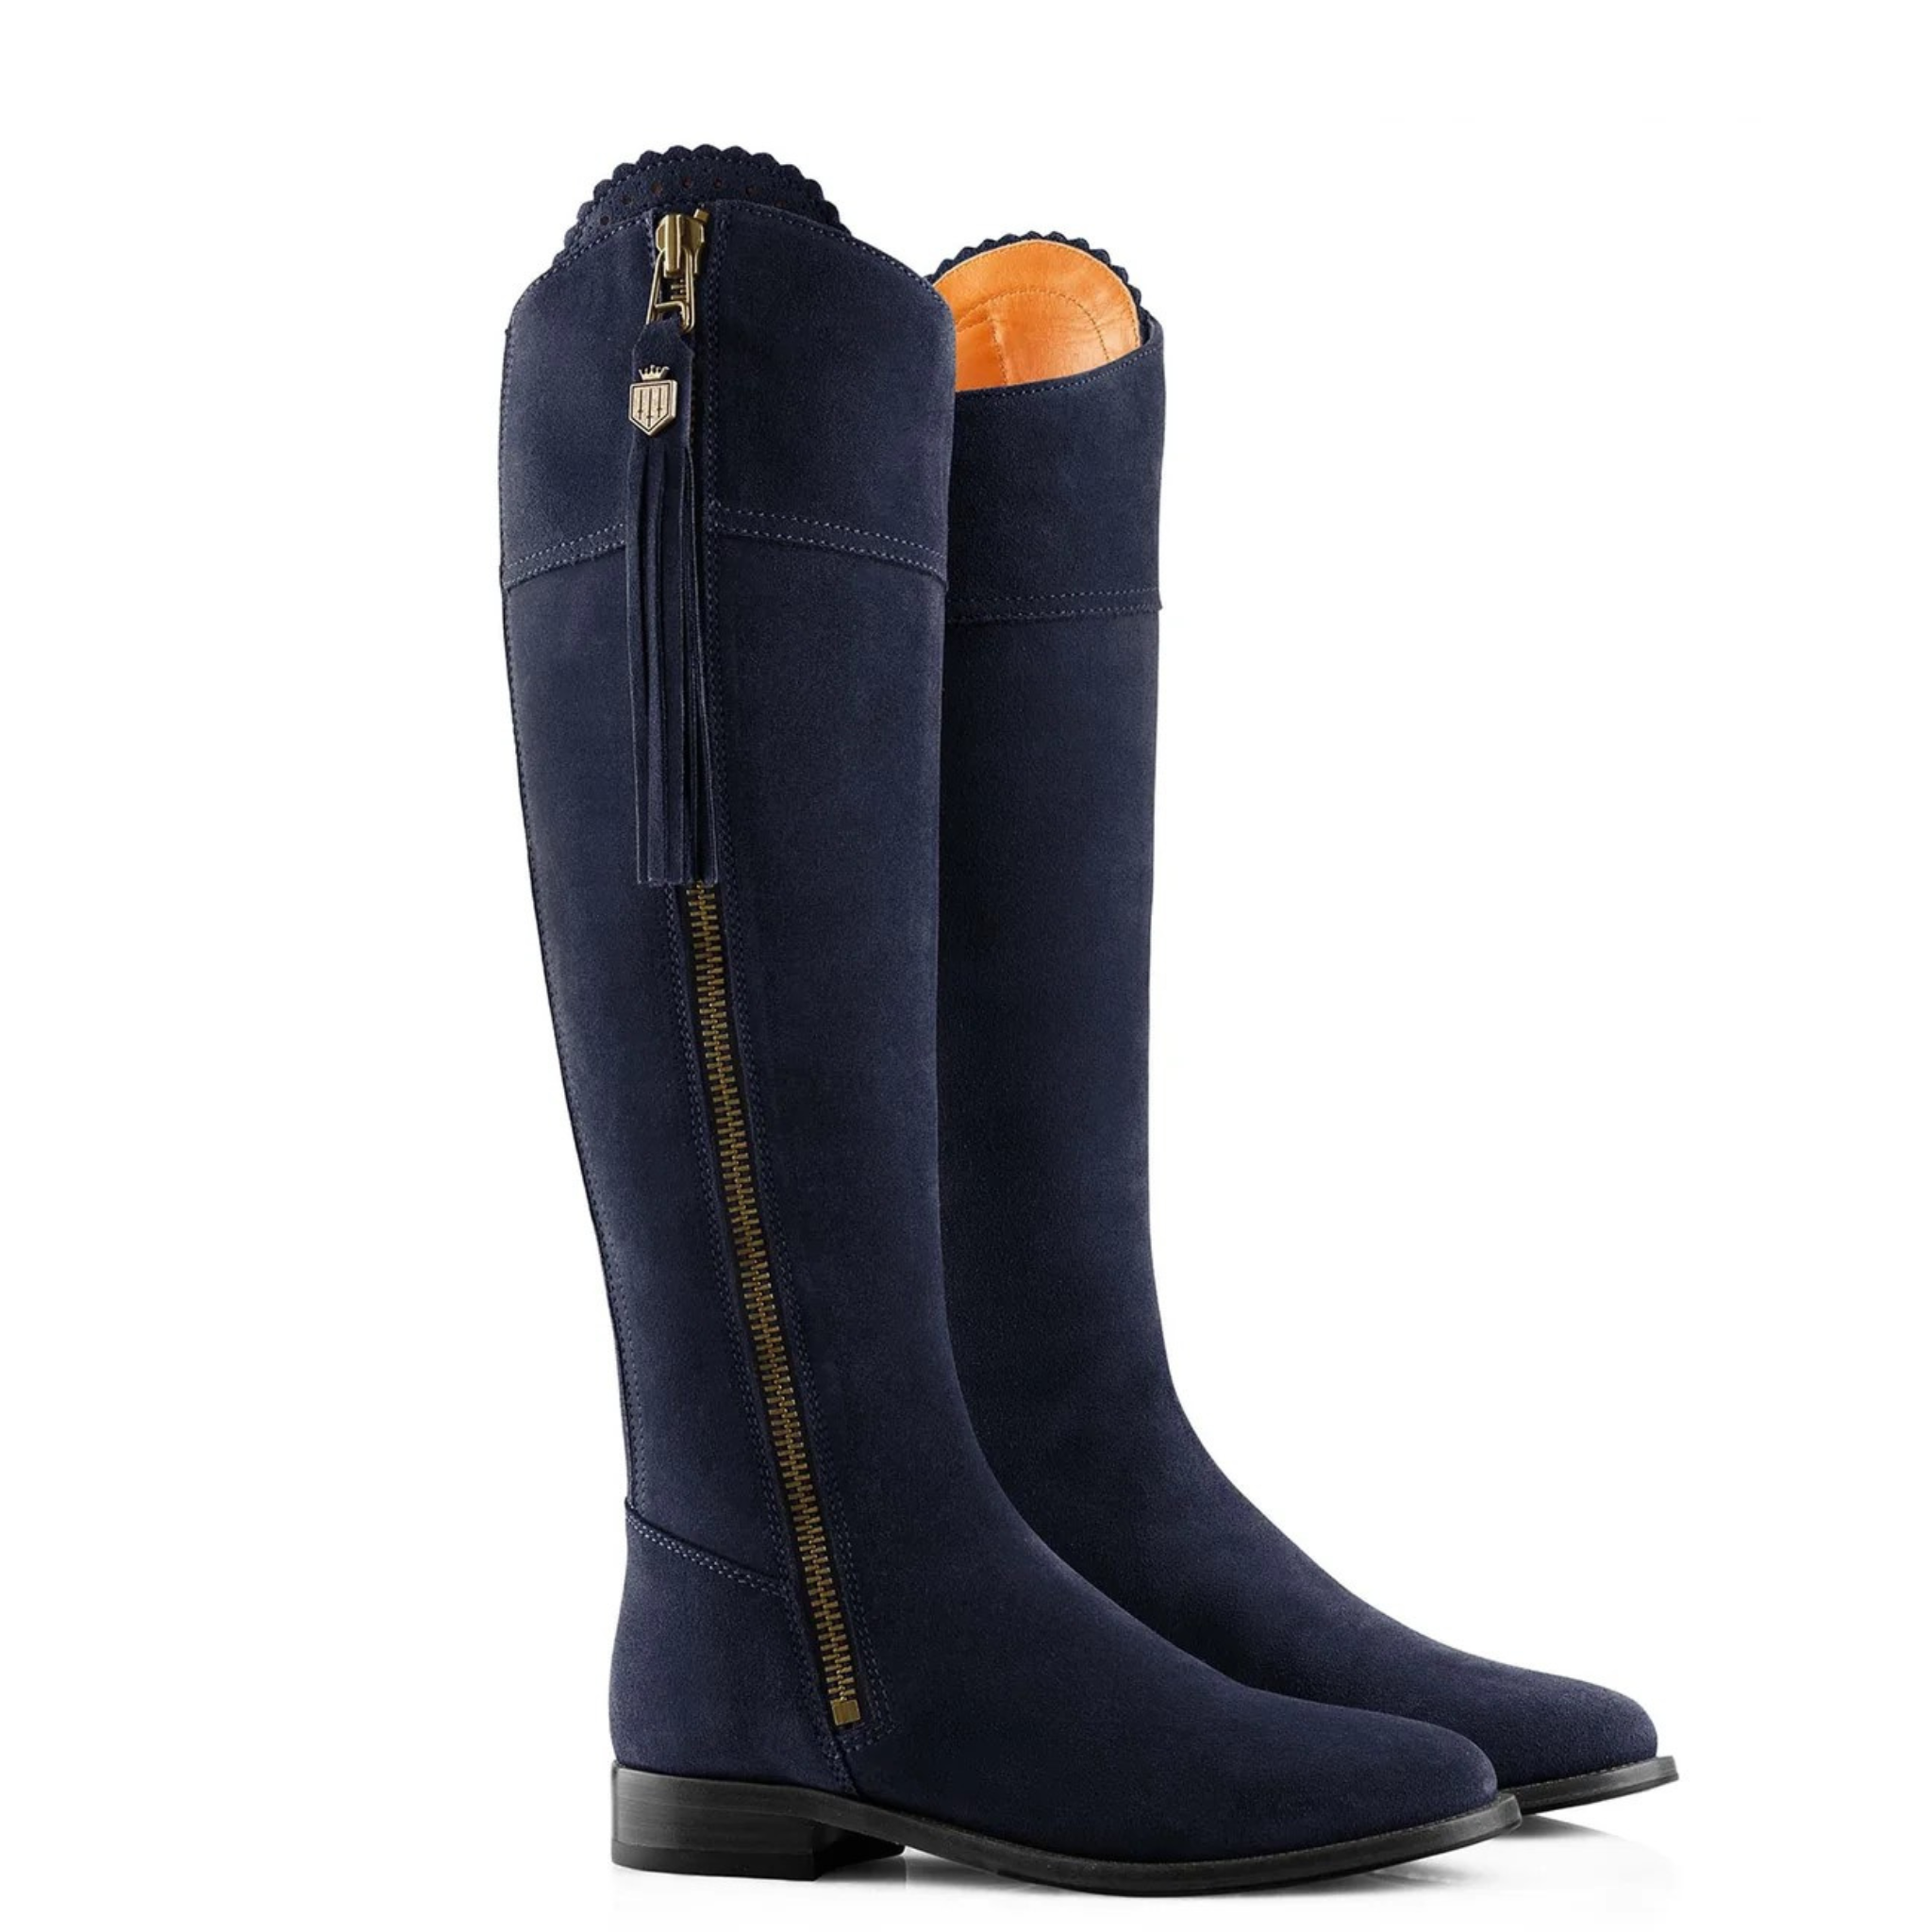 The Regina Sporting Fit Navy Suede